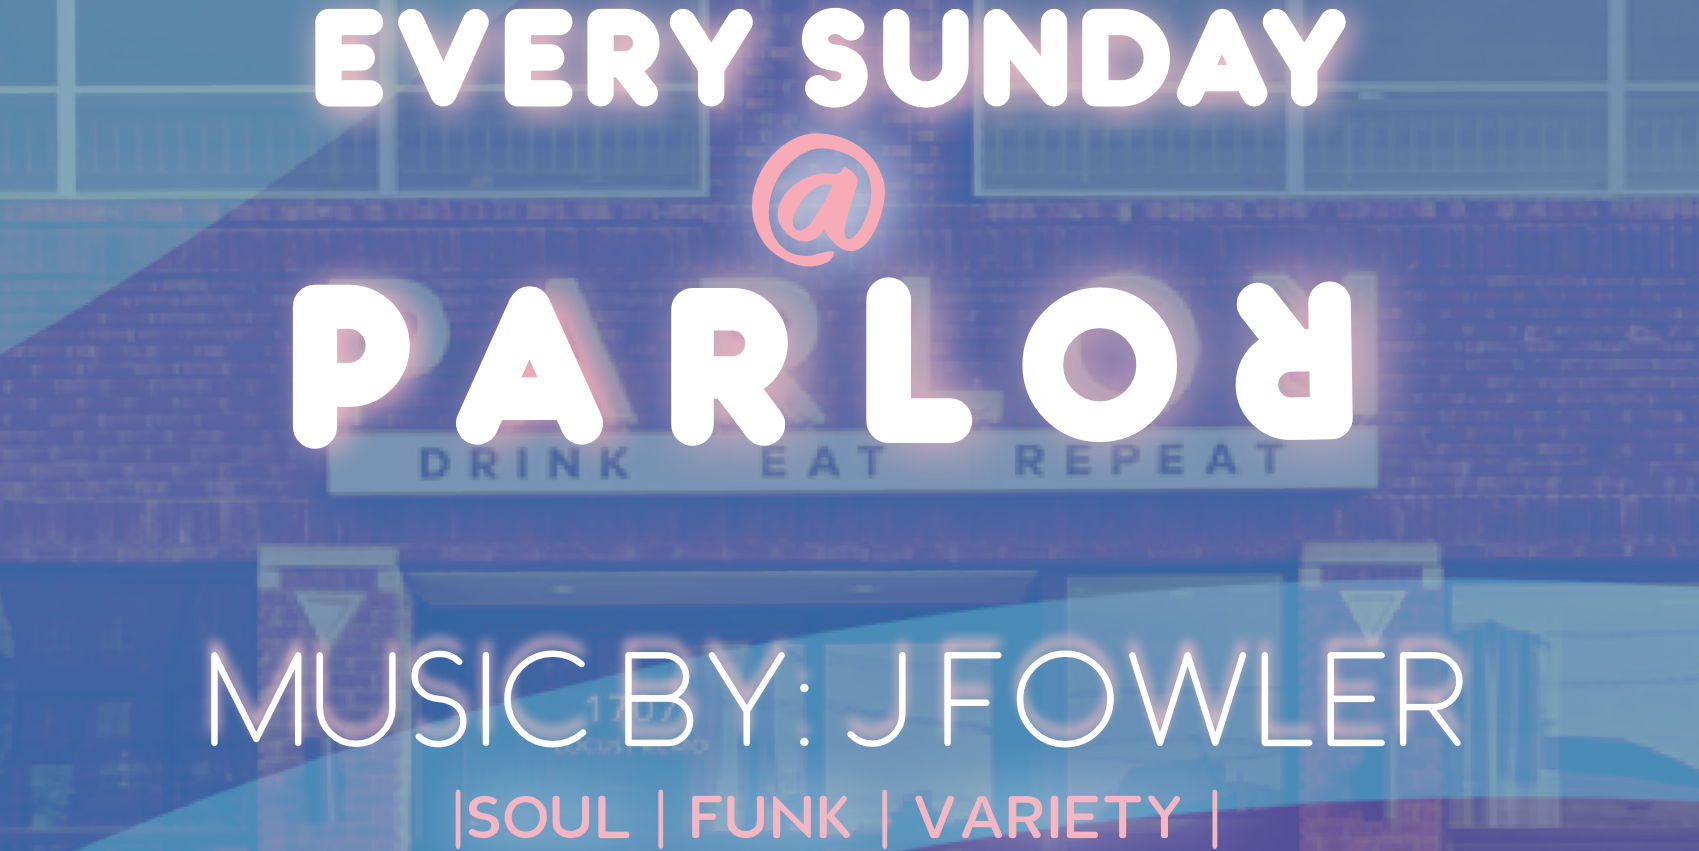 J Fowler at Parlor  promotional image